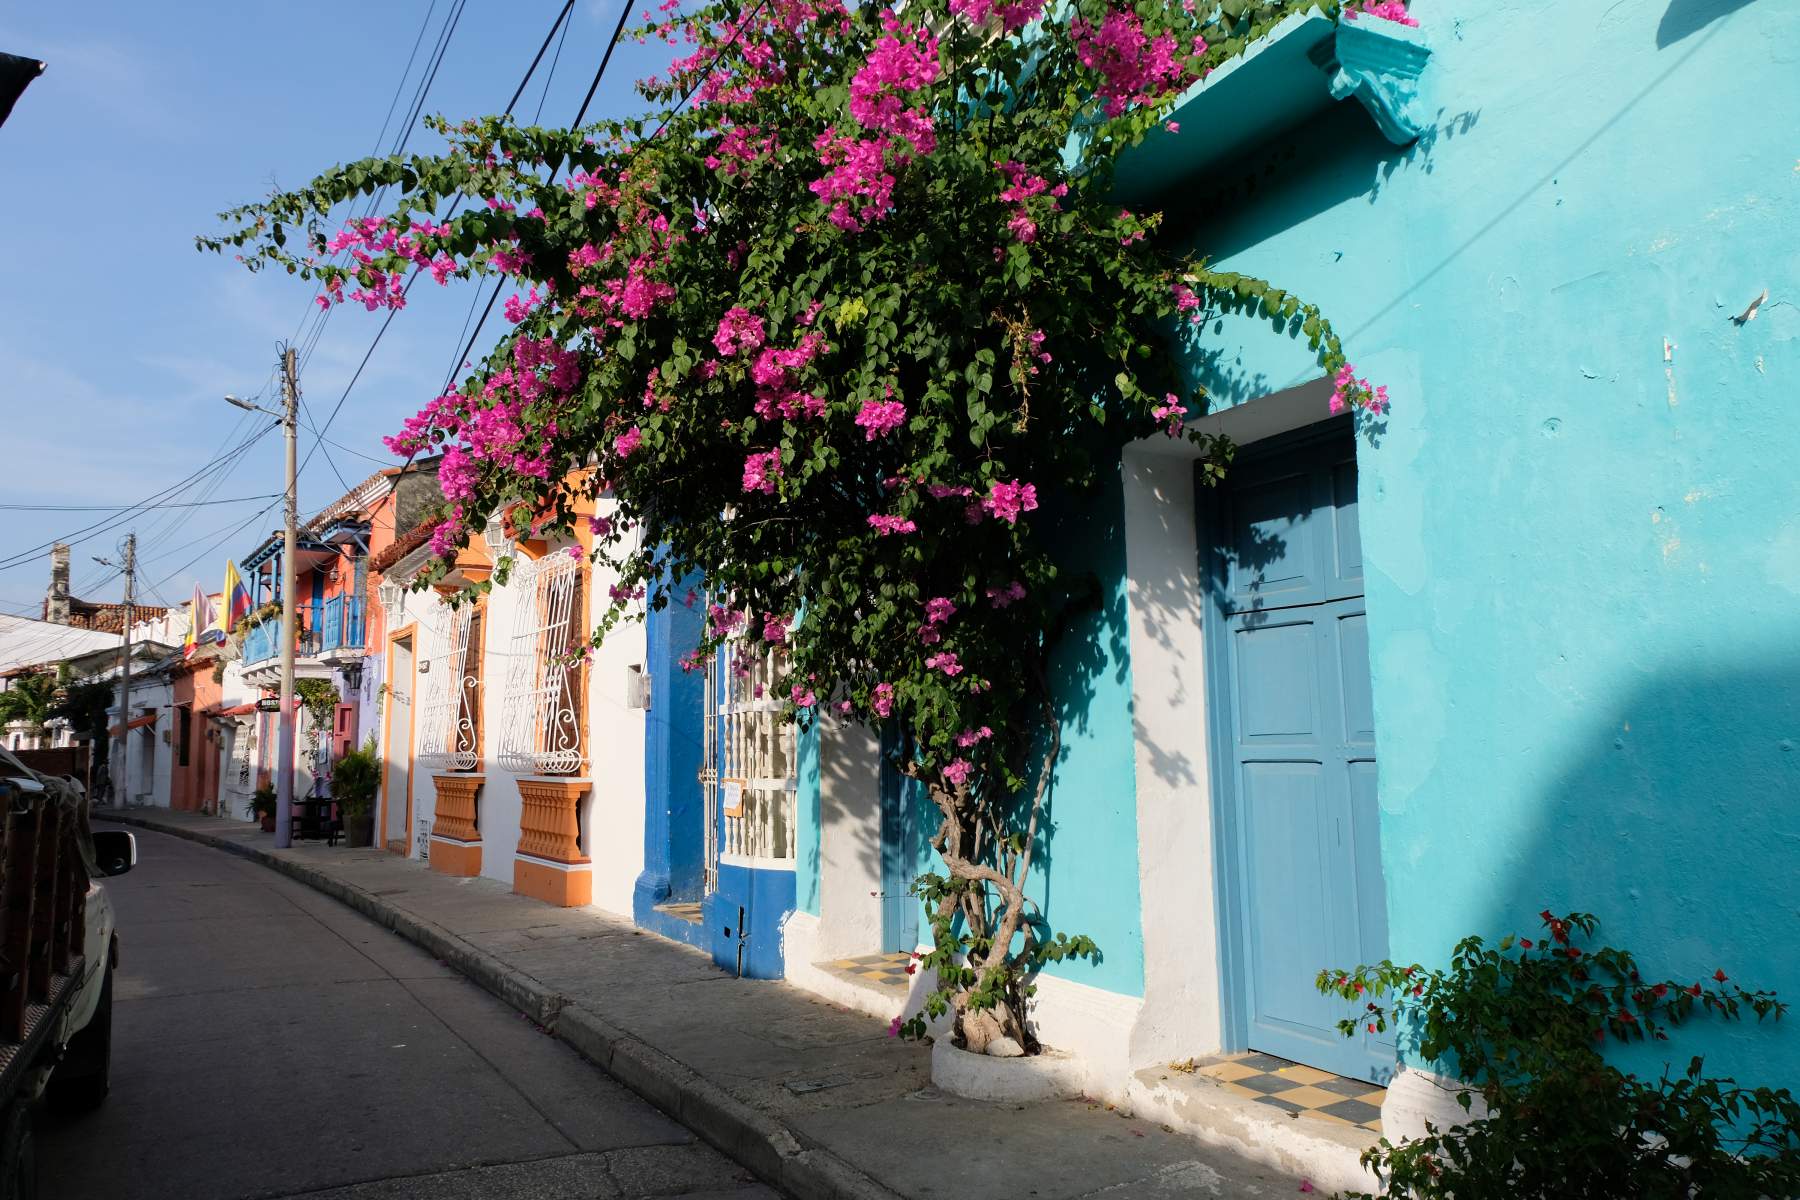 Colofrul houses and flowers in Getsemaní, Cartagena, Colombia